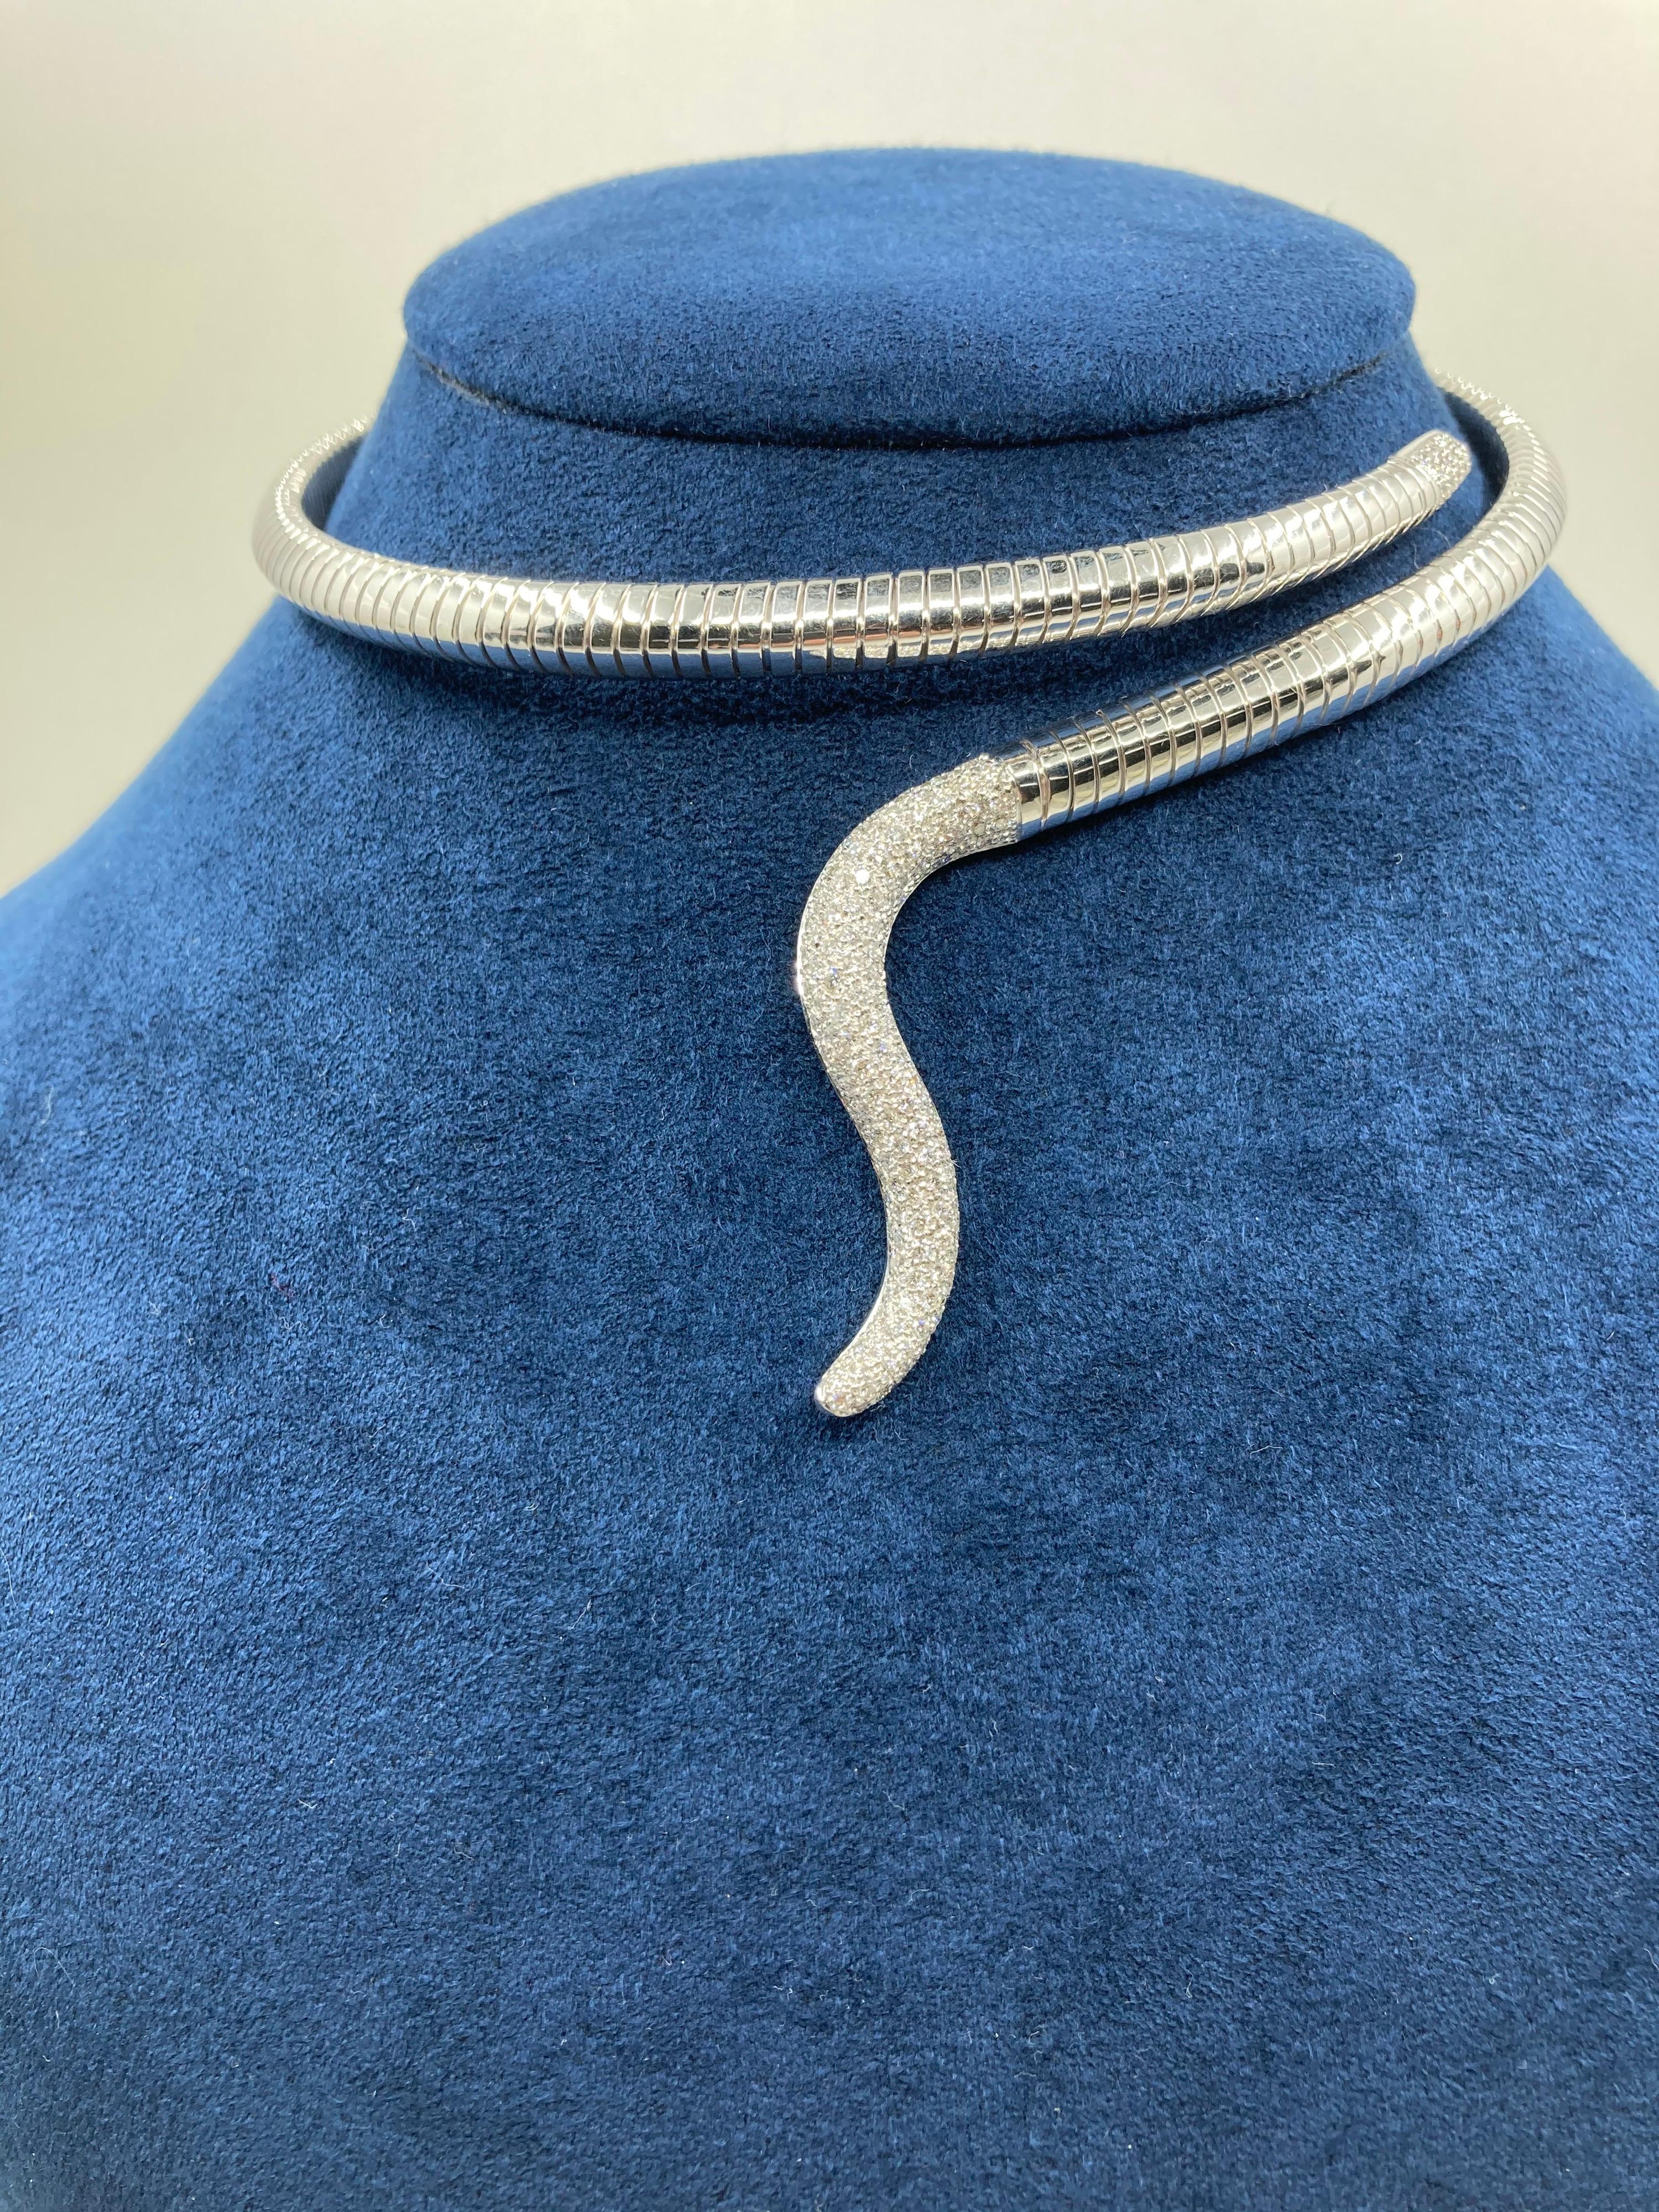 Timeless fine White Gold Necklace, with Diamonds ct. 2.92, Made in Italy by Roberto Casarin.

This Exclusive fine handmade necklace, with its timeless design, rapresents the true Handmade Italian Style. It comes with 2.92 Carat of fine Diamonds, and